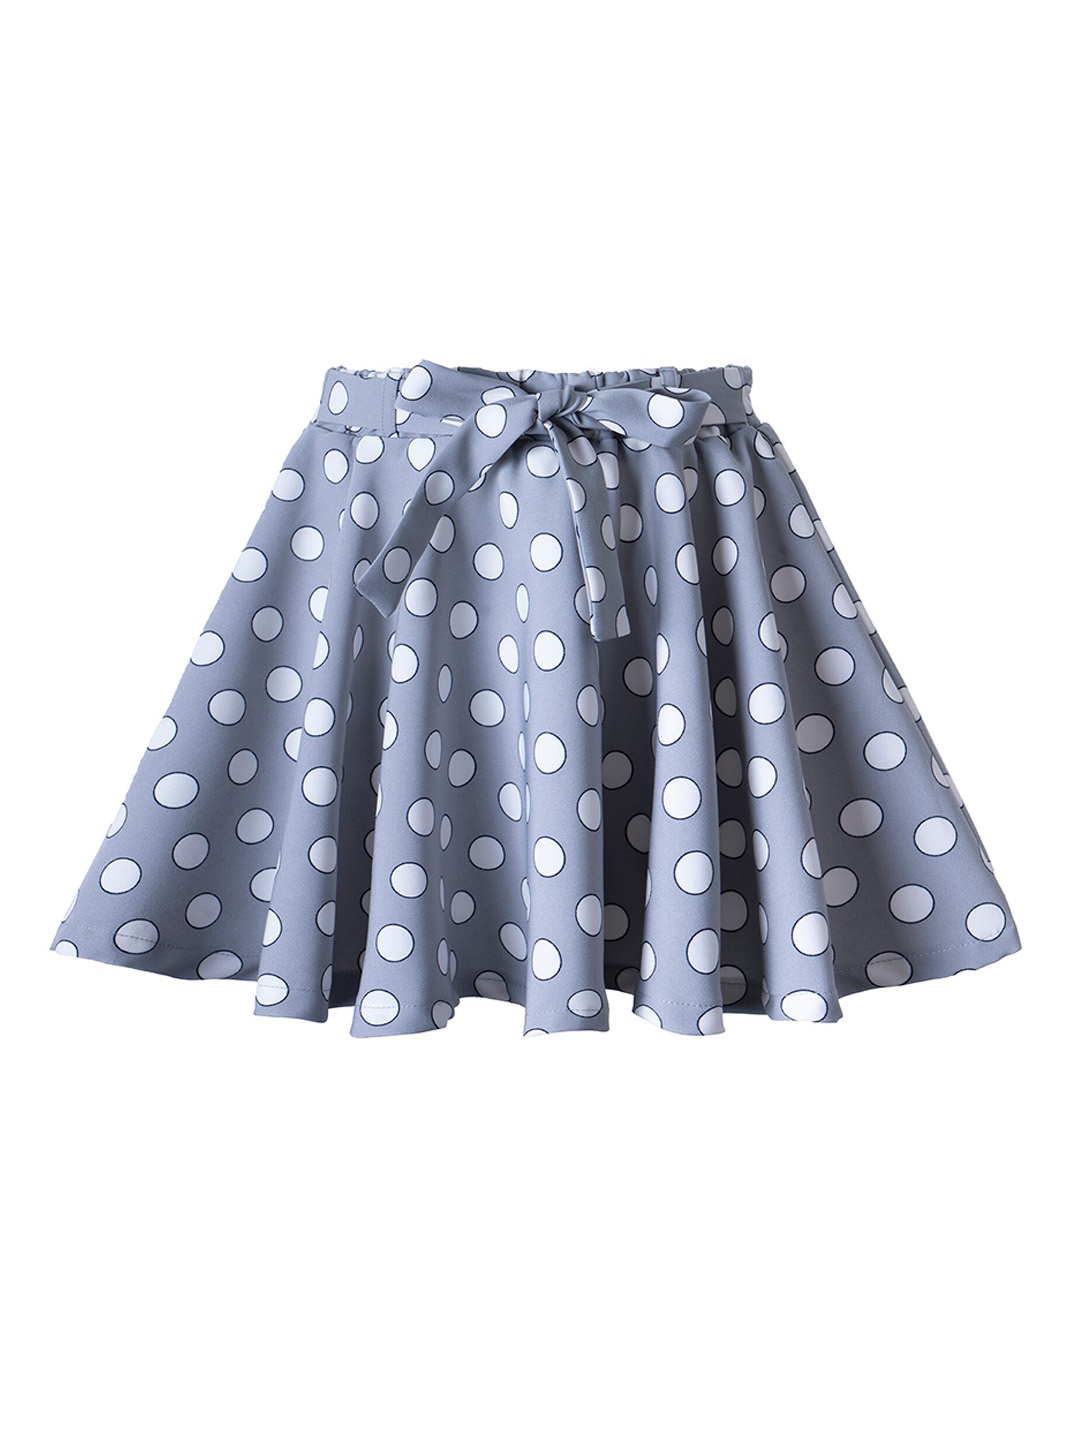 

Hunny Bunny Girls Grey & White Polka Dot Printed Flared Knee-Length Skirt With Attached Shorts